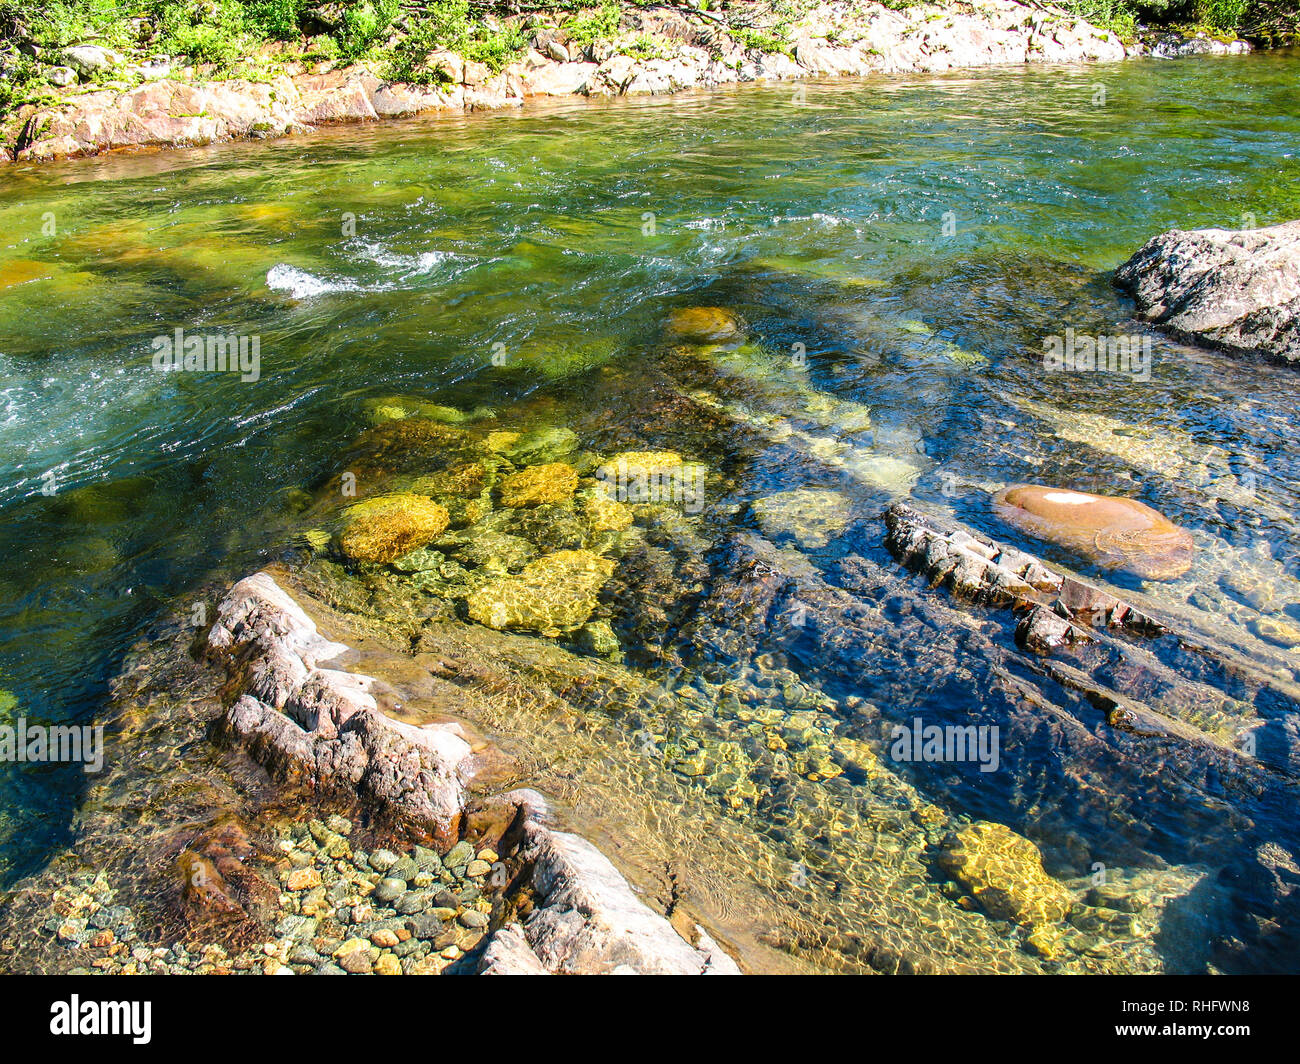 Rapid stream of mountain river with clean transparent water and colorful stones and pebbles on bottom - ecology and environment conservation concept Stock Photo